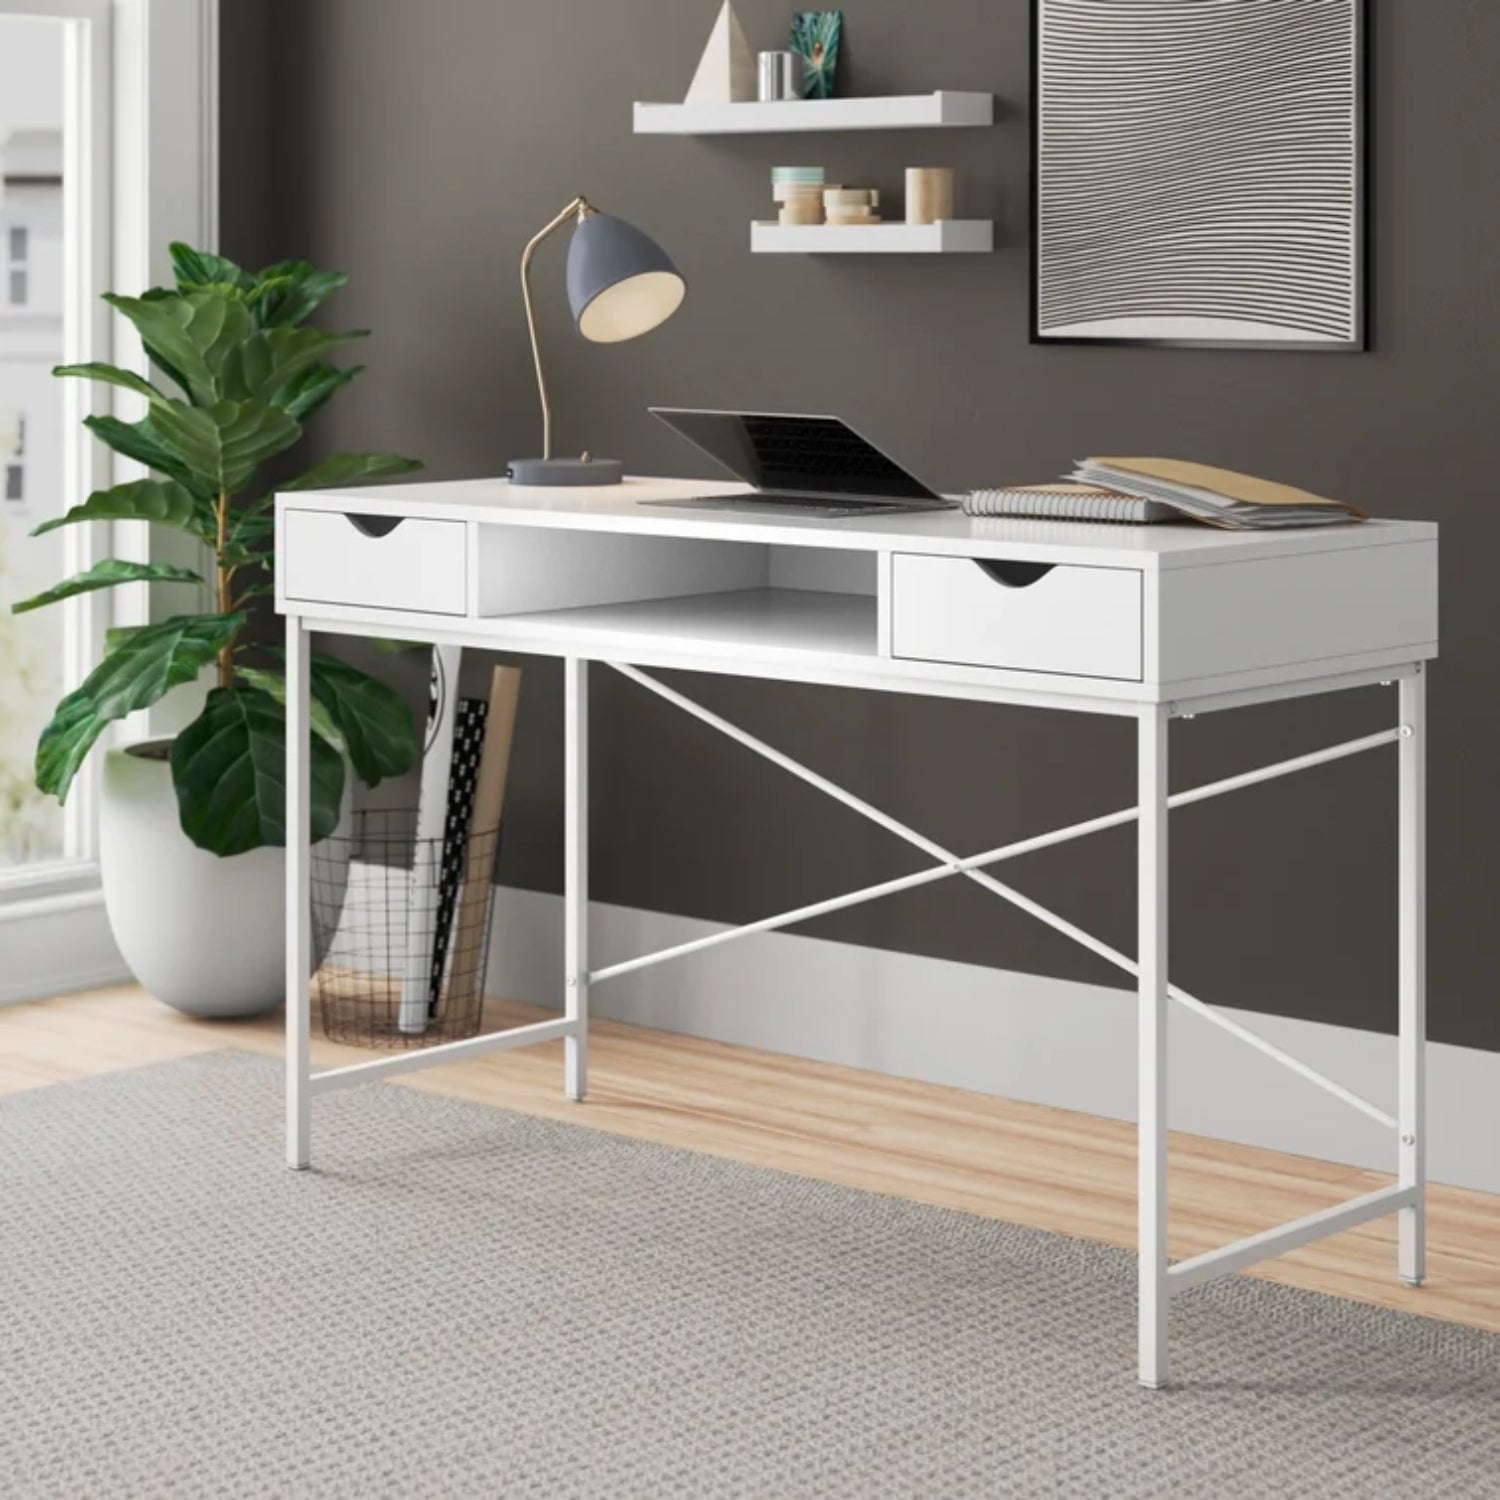 a white desk with drawers and a plant